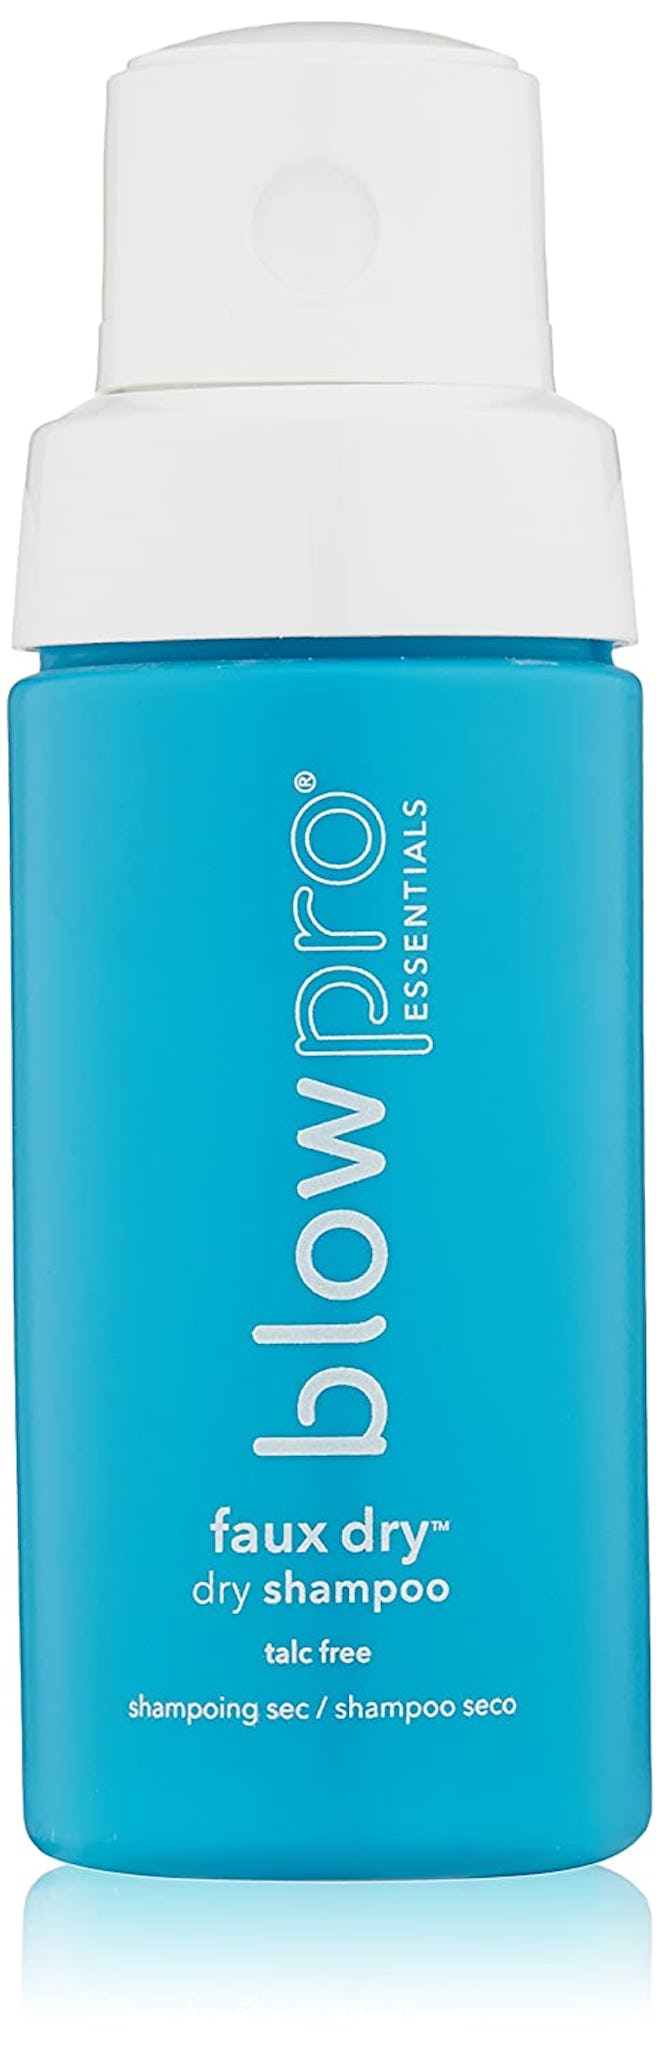 Faux Dry Shampoo with Pure Protein Blend